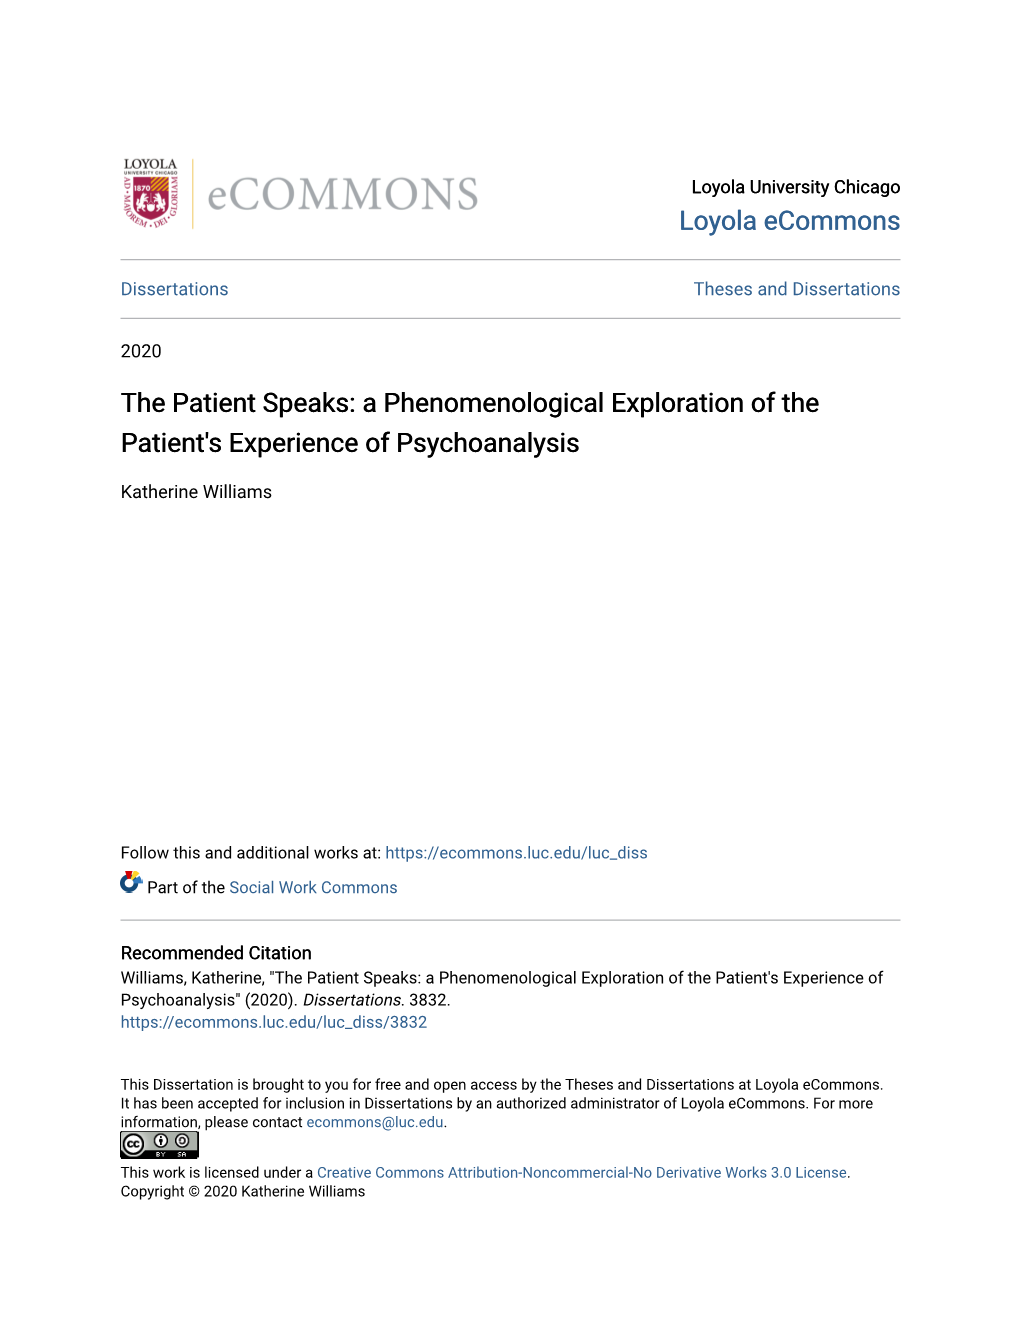 The Patient Speaks: a Phenomenological Exploration of the Patient's Experience of Psychoanalysis